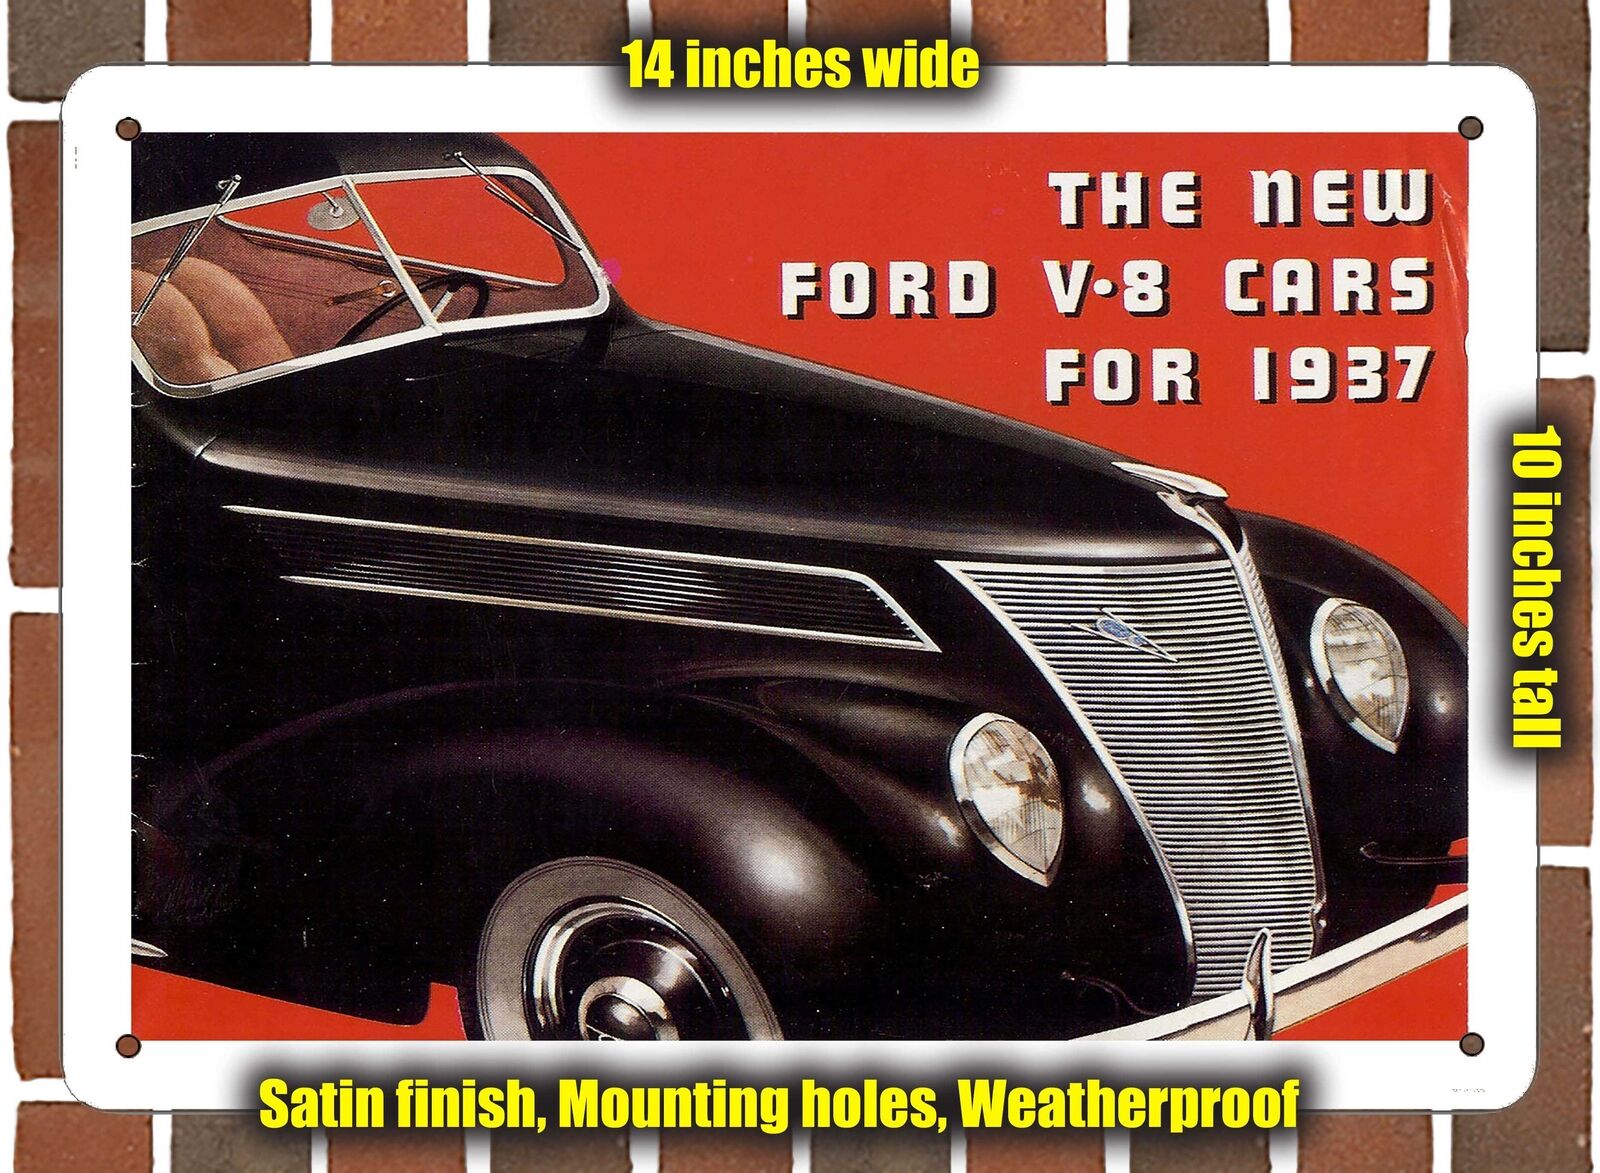 METAL SIGN - 1937 Ford